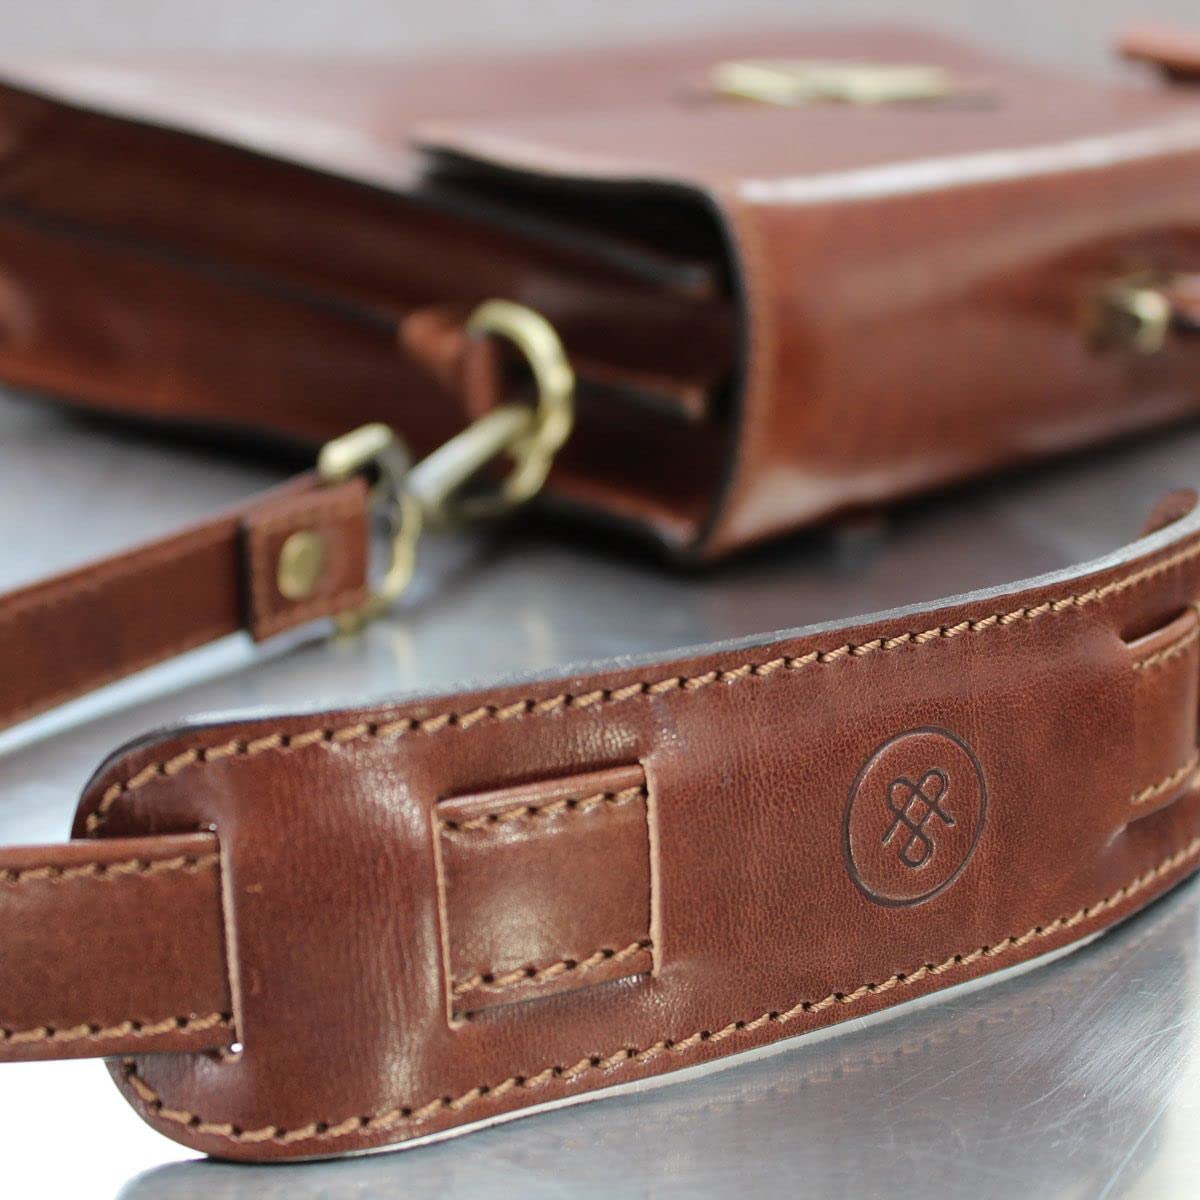 Maxwell Scott | Luxury Leather Luggage/Briefcase Strap | The Shoulder Strap | Handmade in Italy | Chestnut Tan Brown